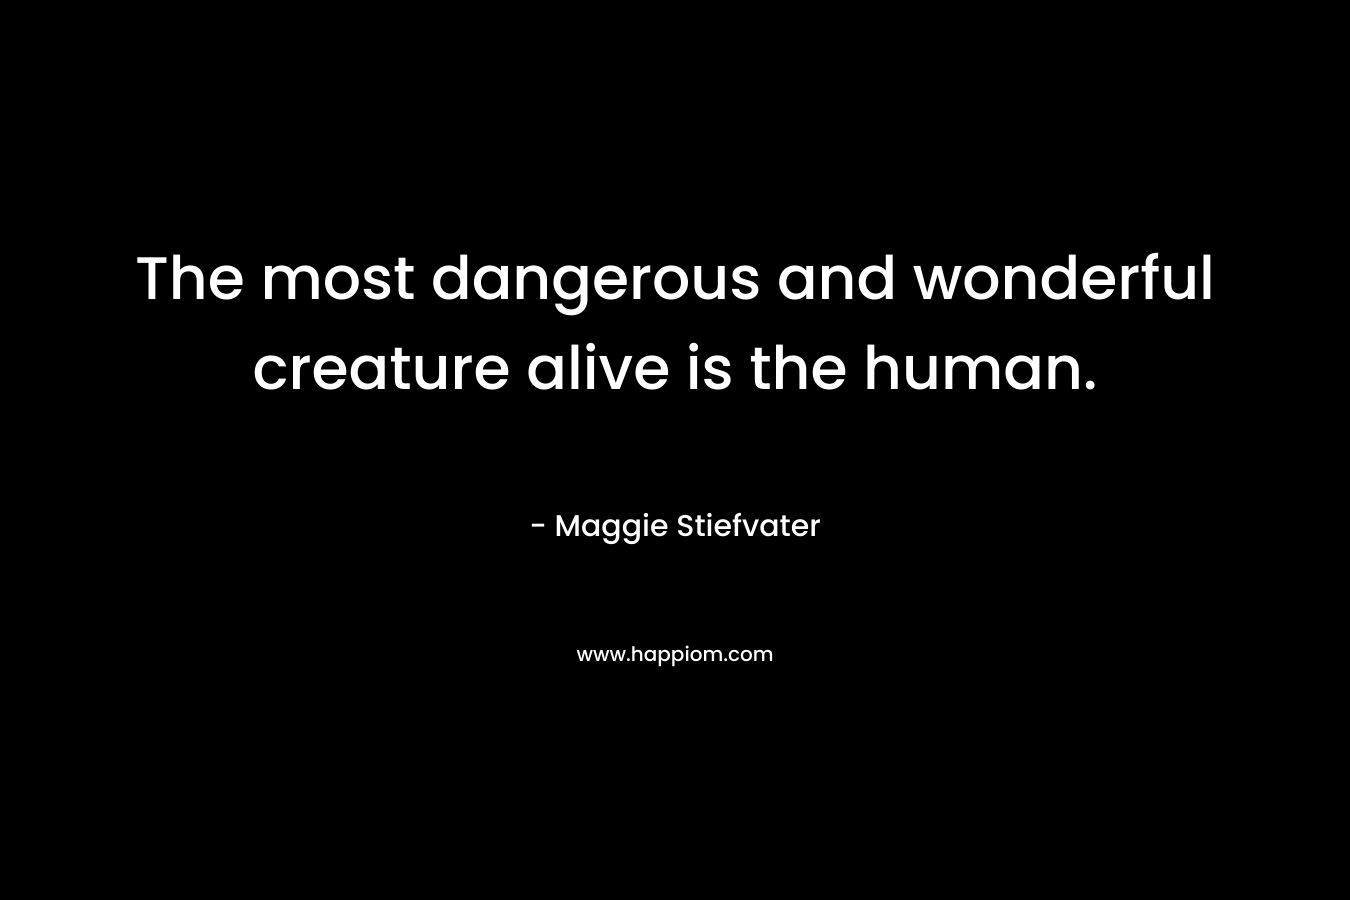 The most dangerous and wonderful creature alive is the human.